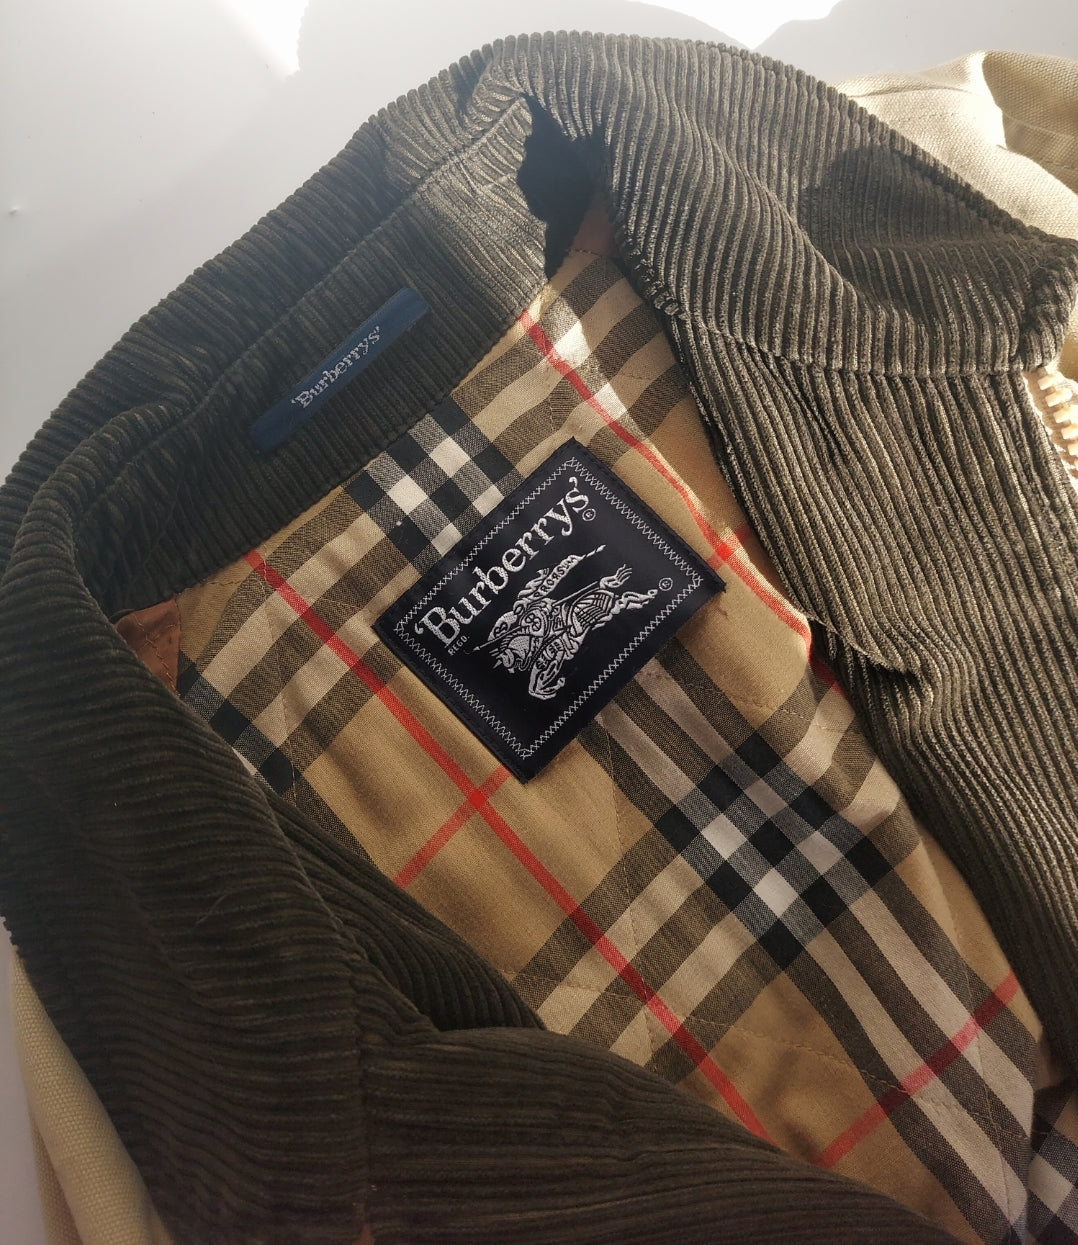 Giacca Burberry oversize